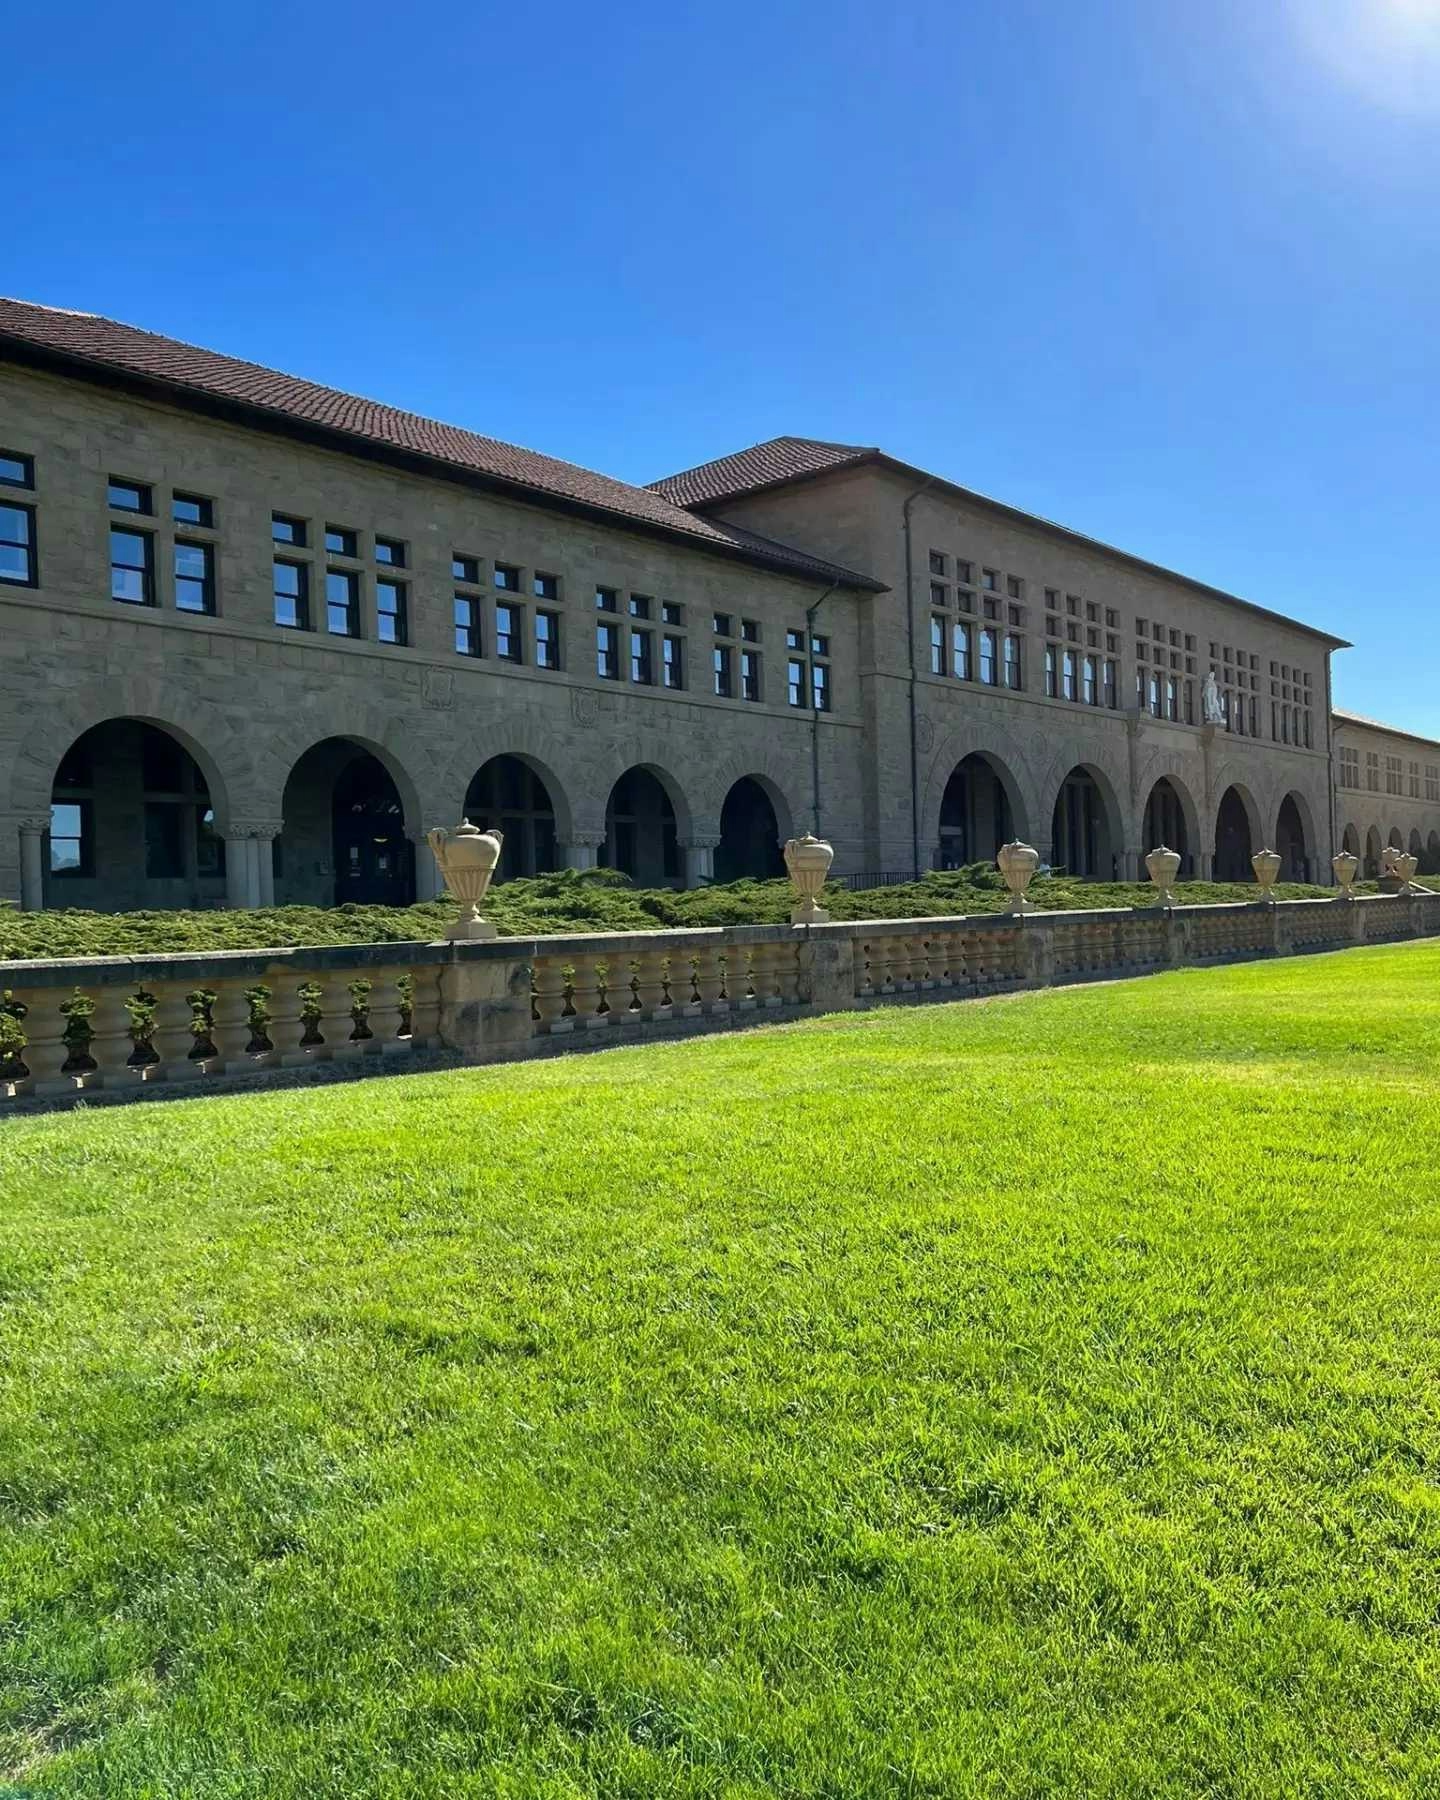 Stanford: Laborit CPO takes an immersive course in the cradle of innovation.